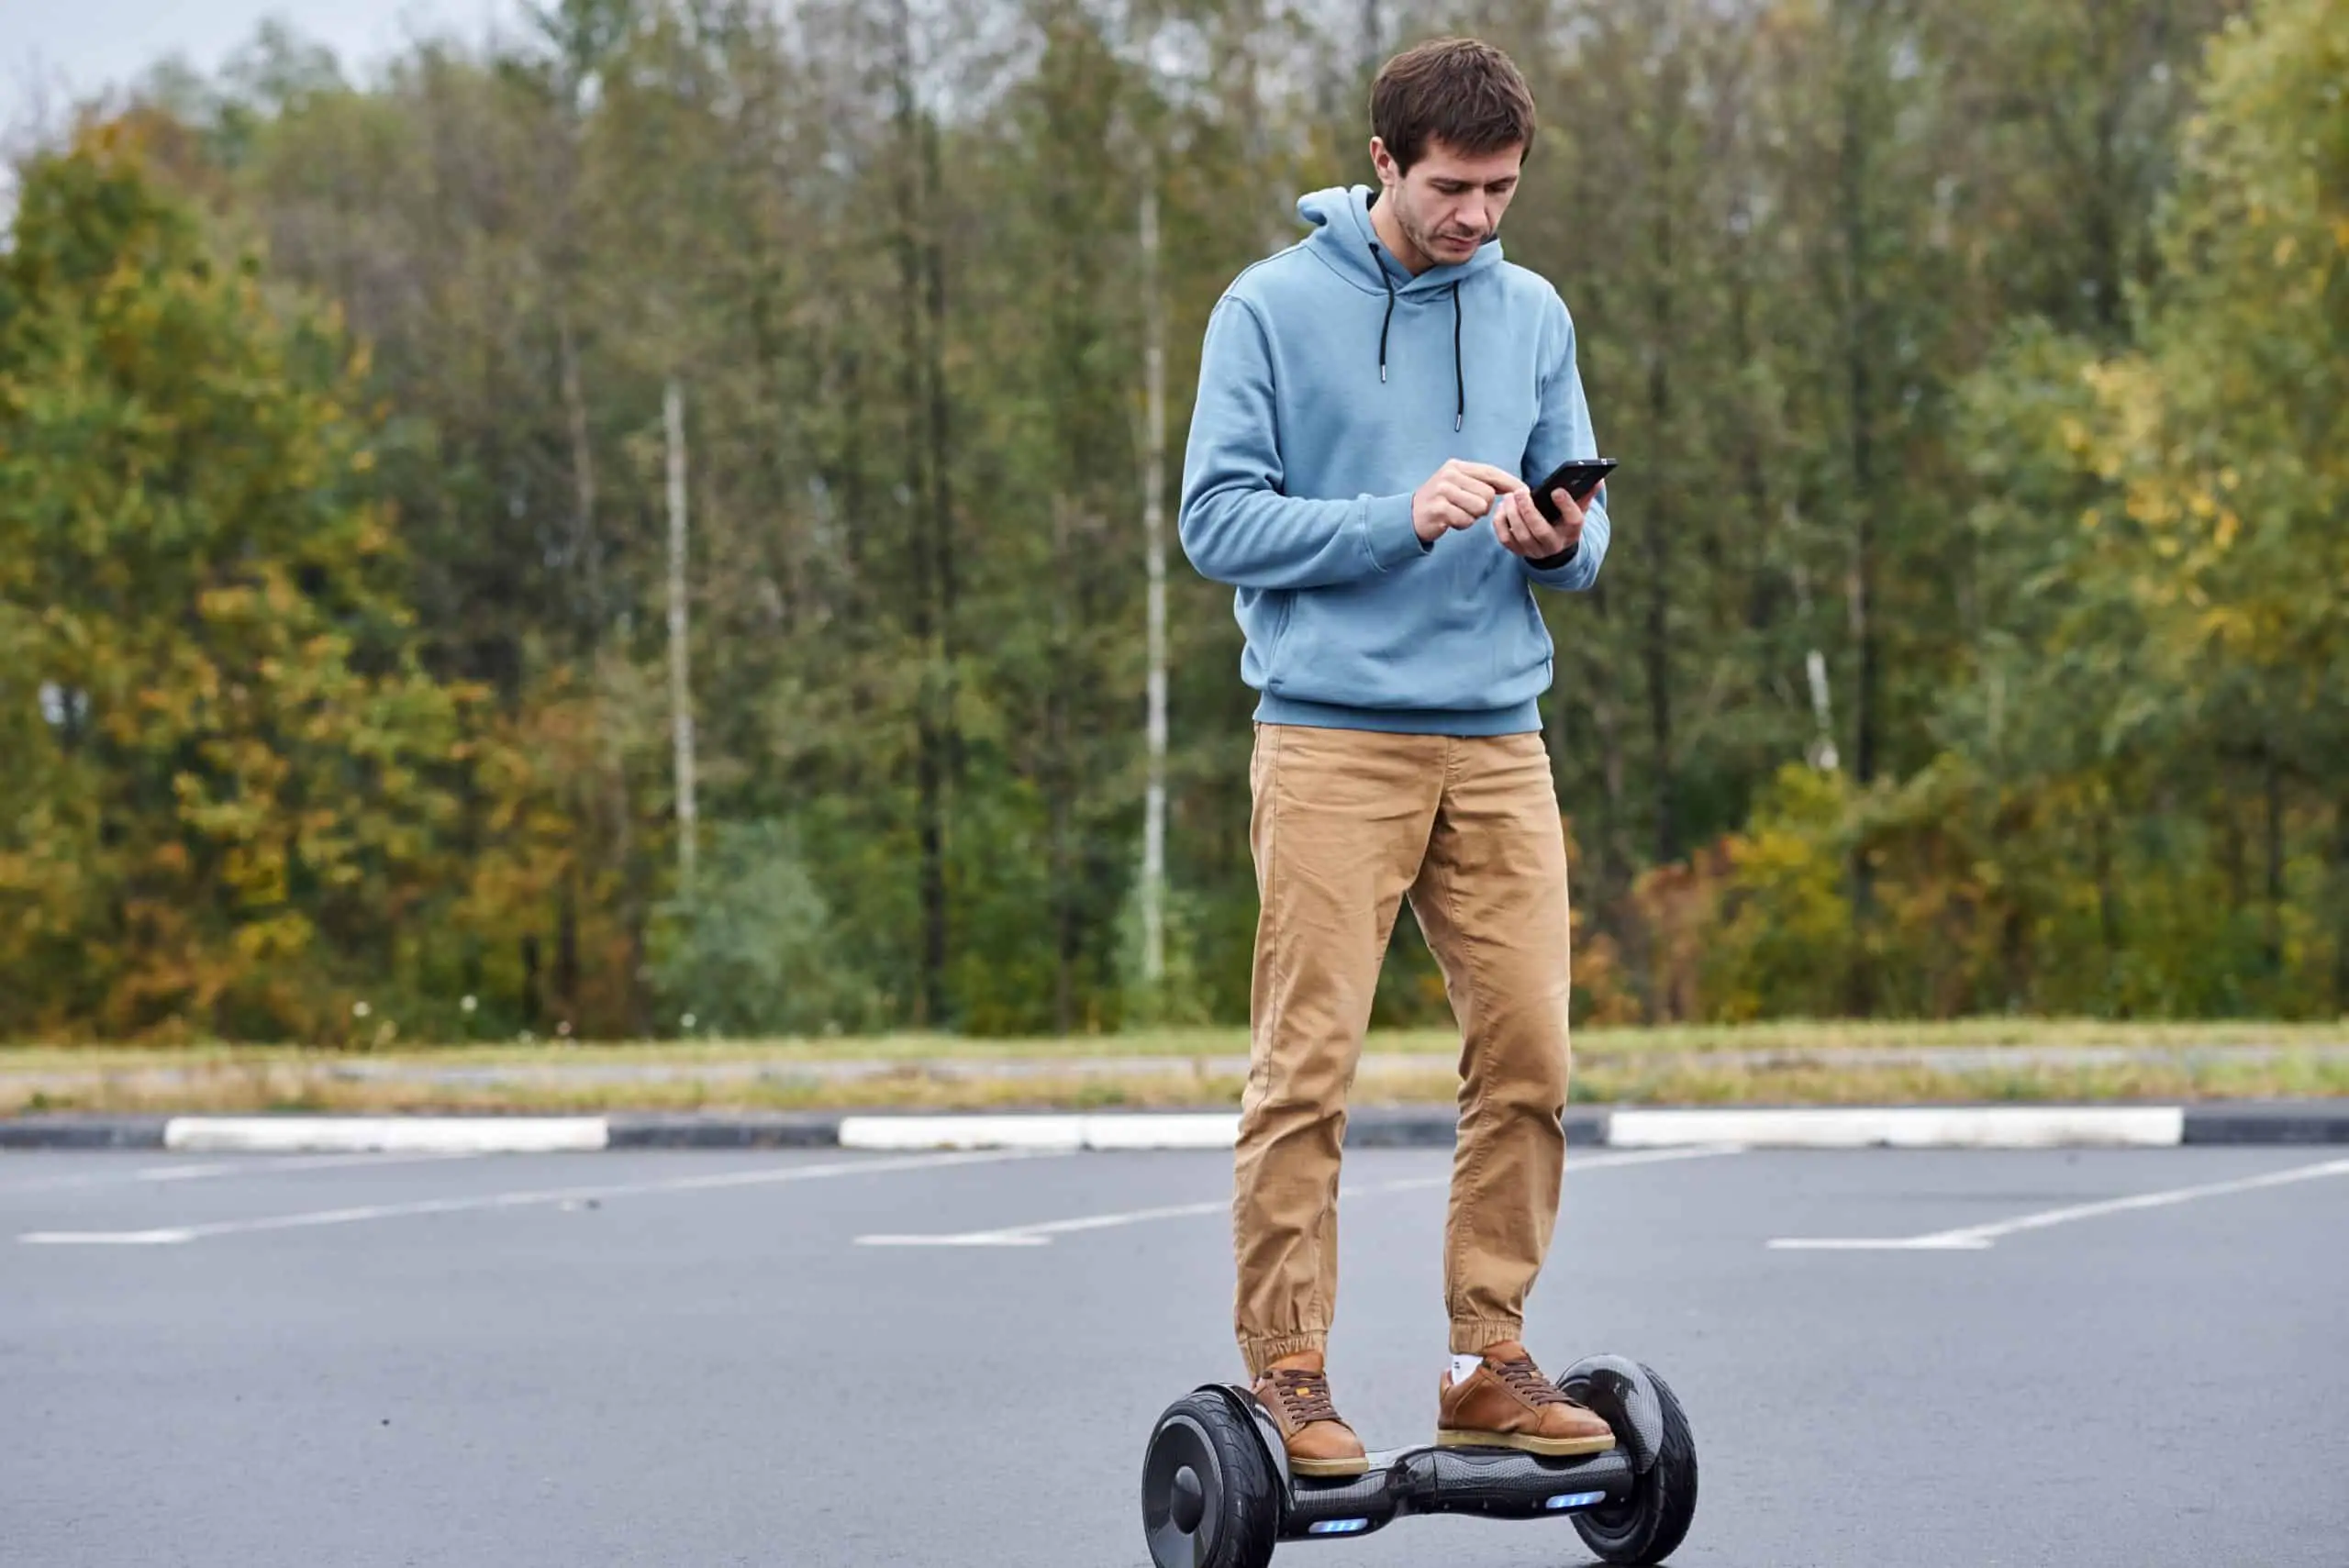 What is the Top Speed of a Hoverboard?